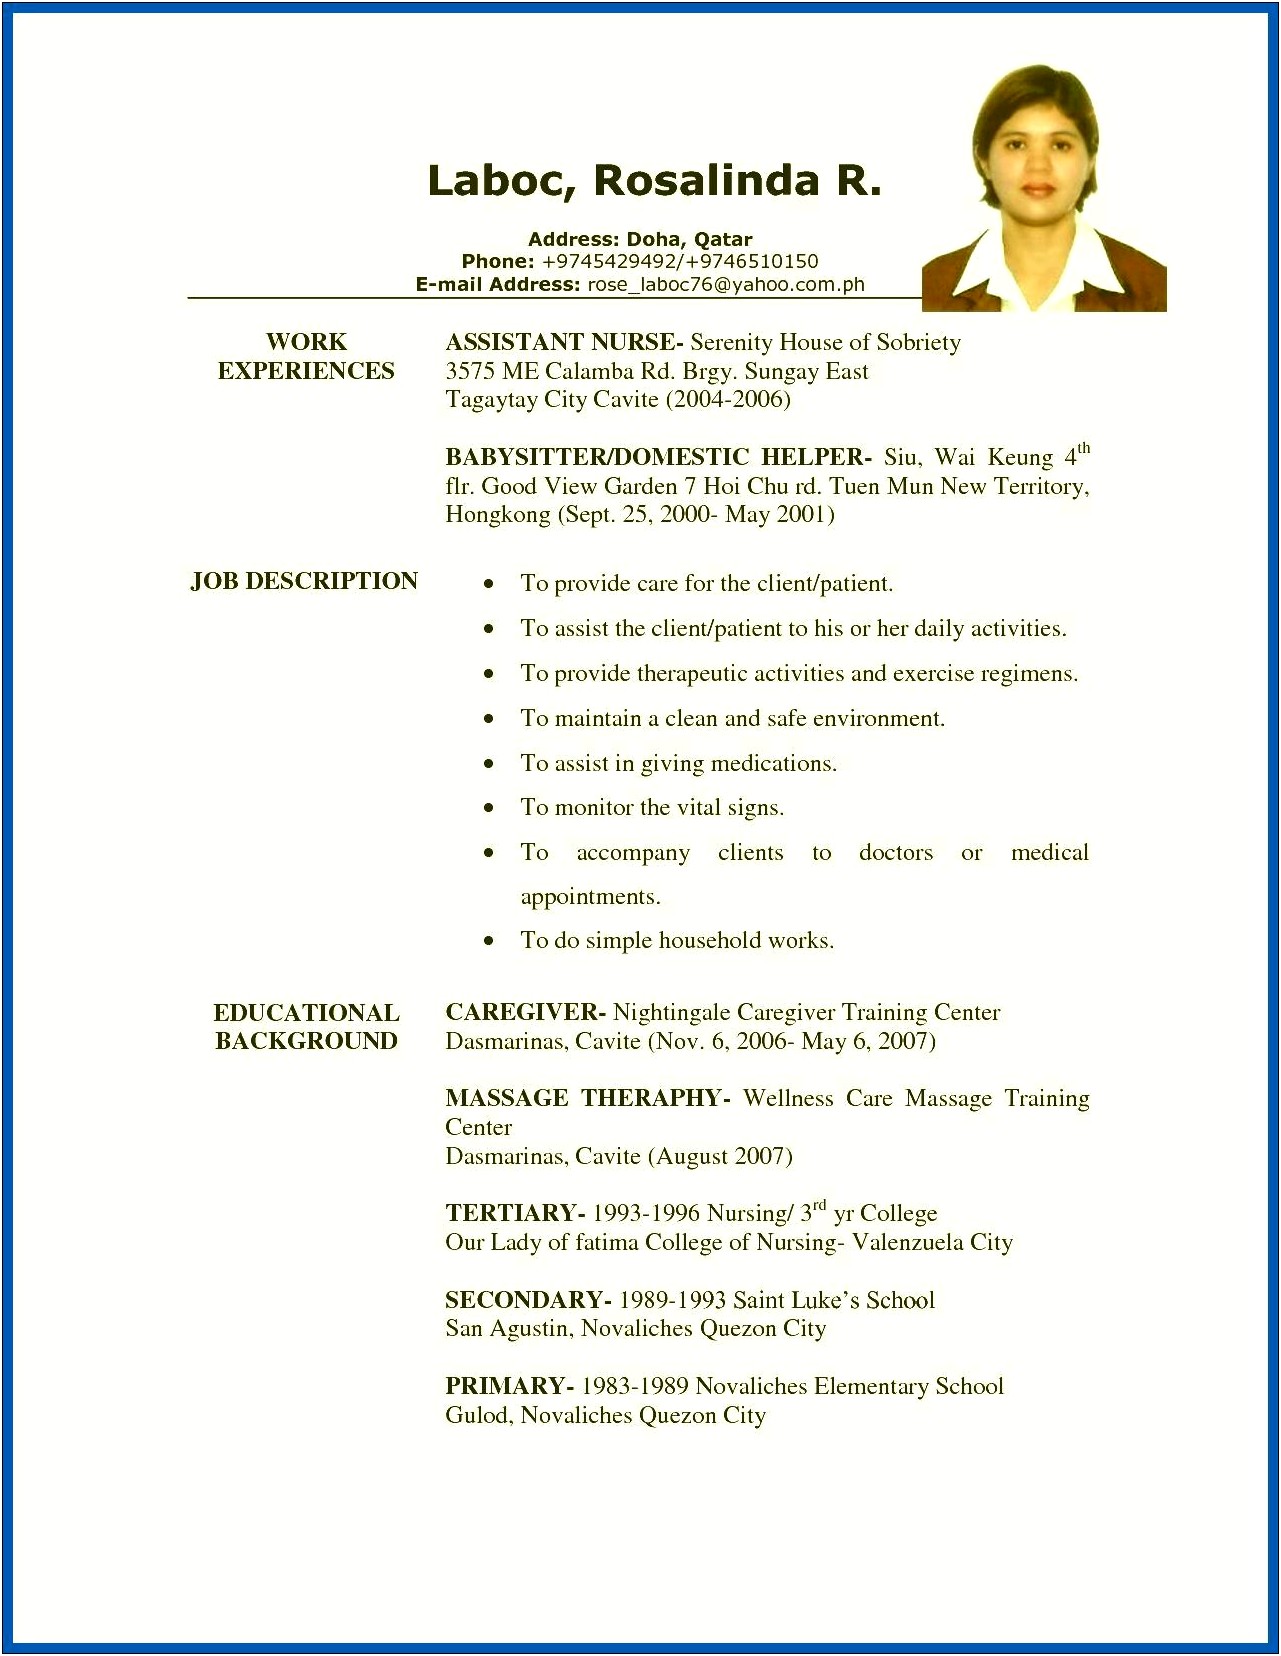 Examples Of Care Giver Subjects For A Resume